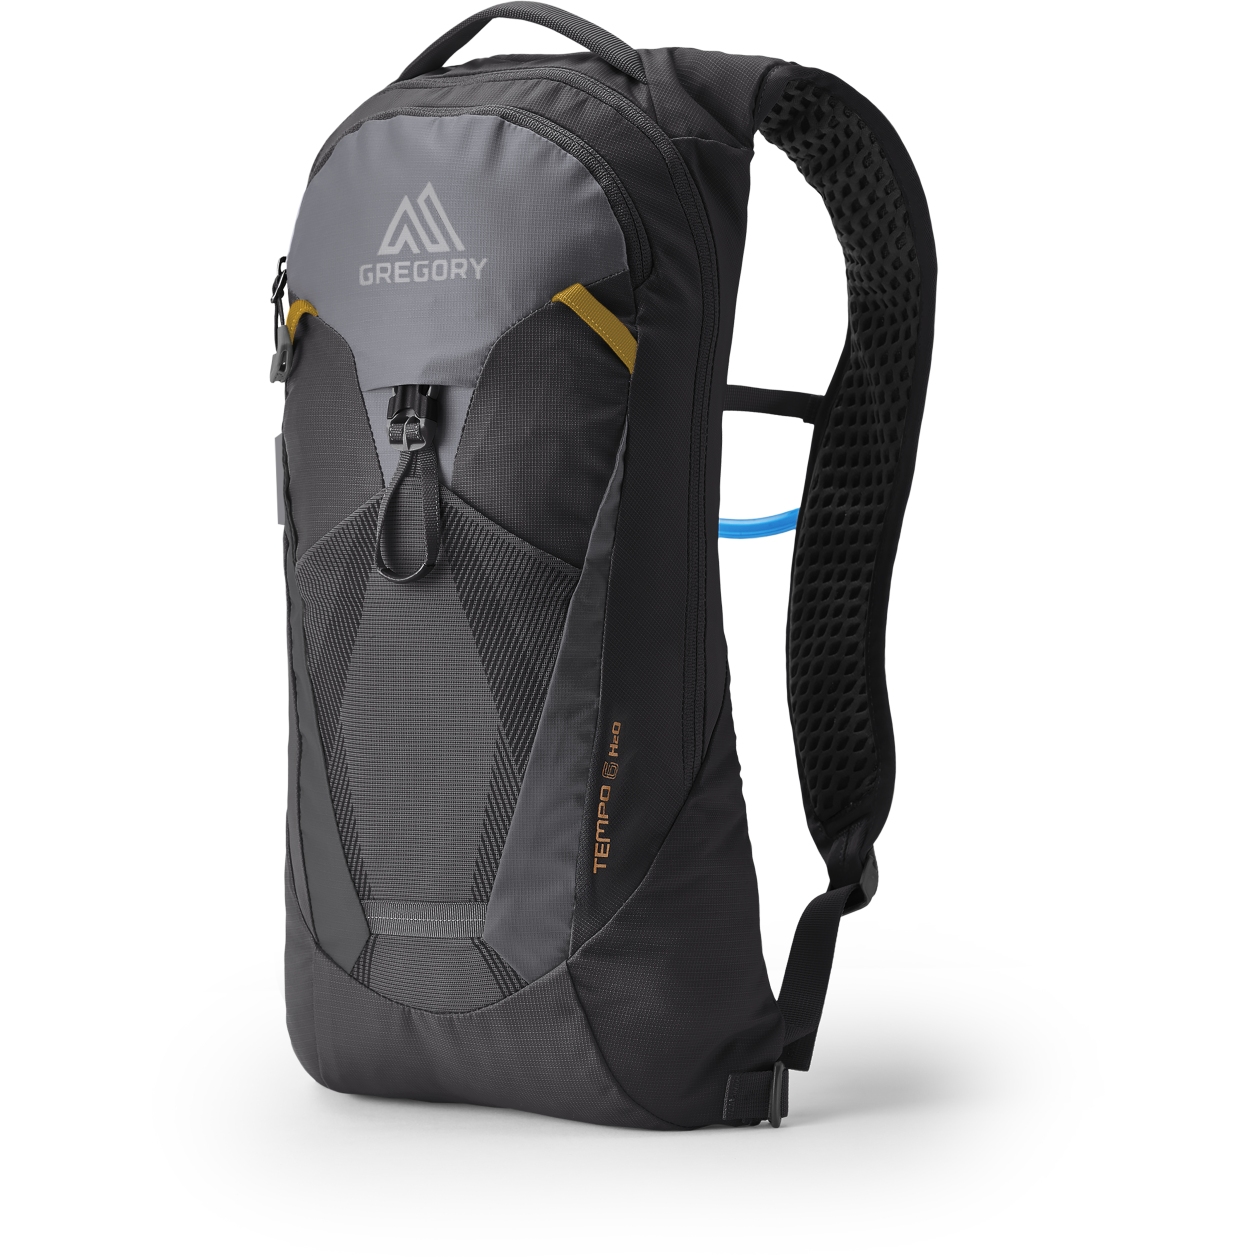 Image of Gregory Tempo 6 H2O Backpack - Carbon Bronze